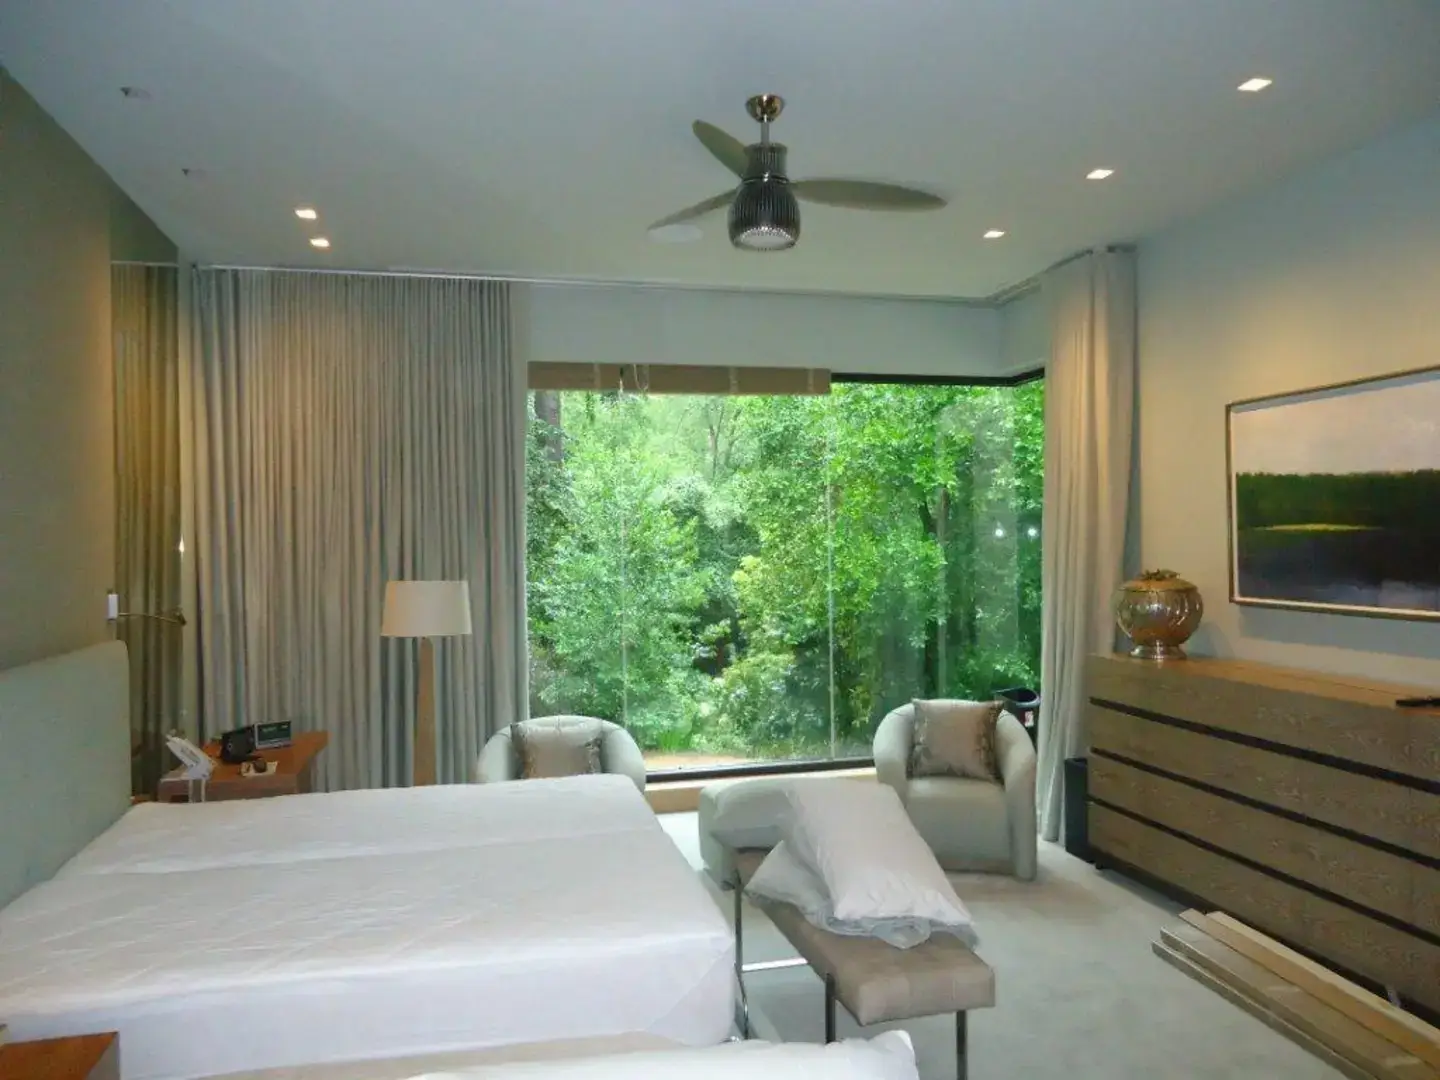 Drapery and custom wooden blinds combination in a bedroom of a home.